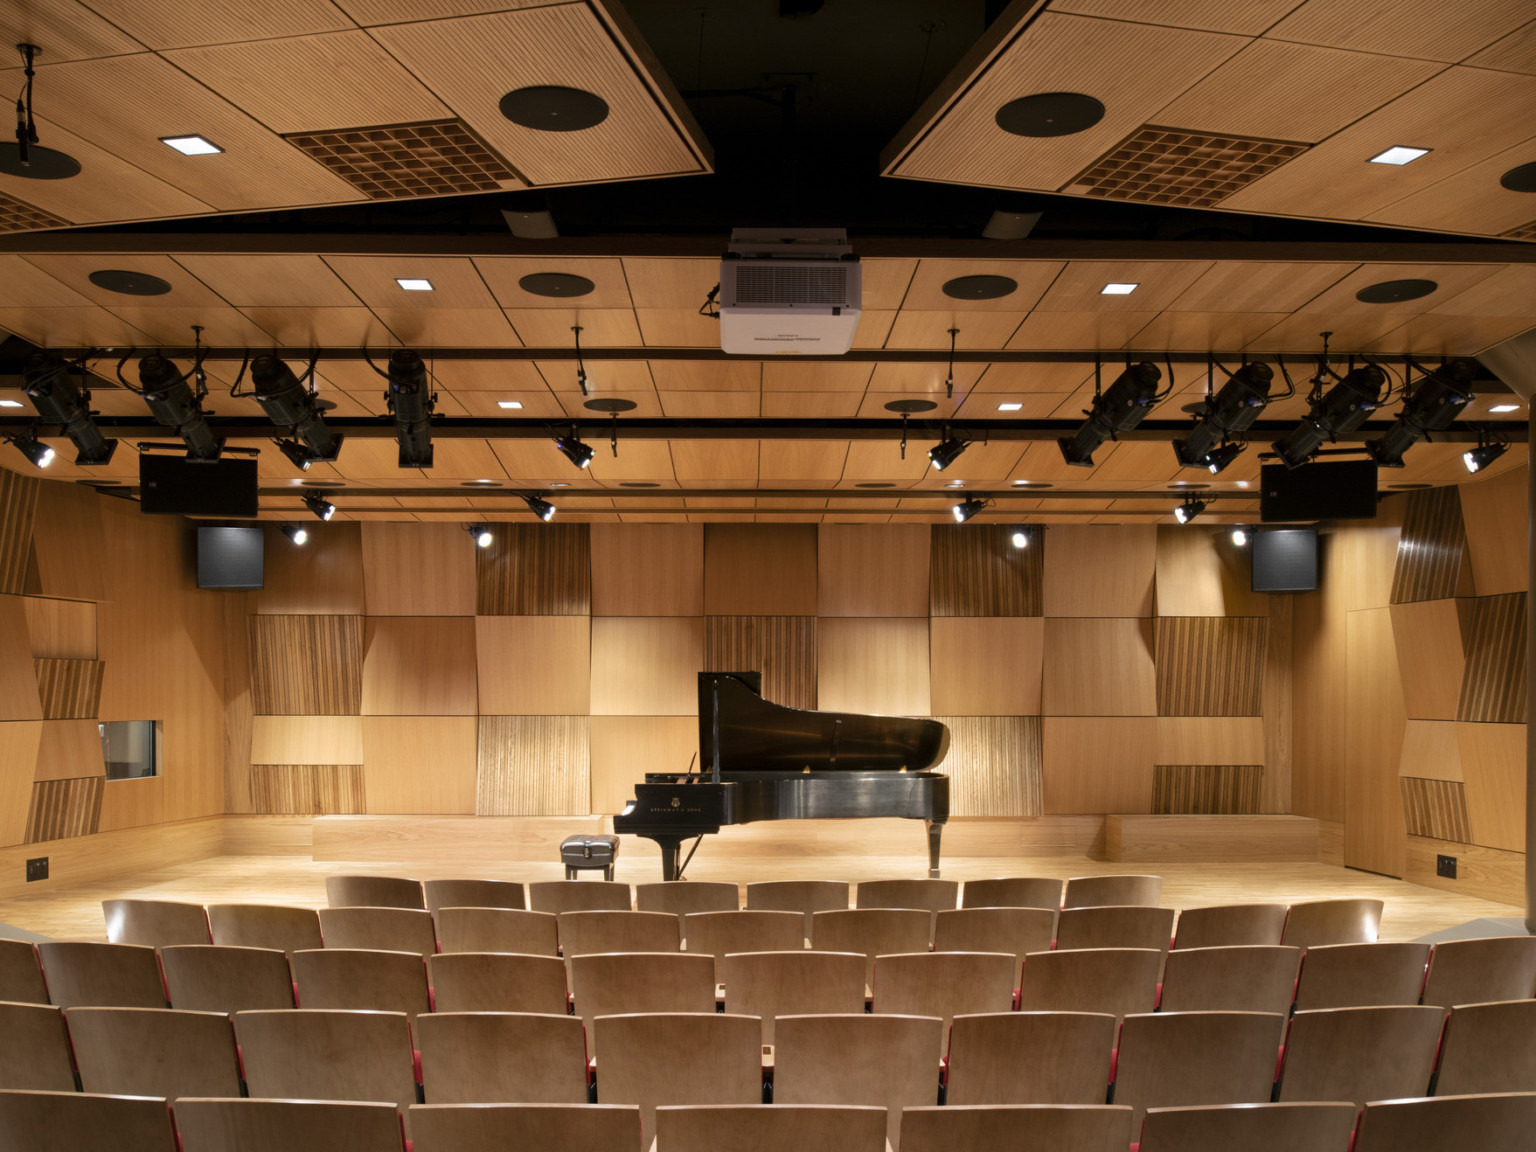 Auditorium with wood stage and seating, matching acoustical panels on stage walls and above, black light fixtures hang down